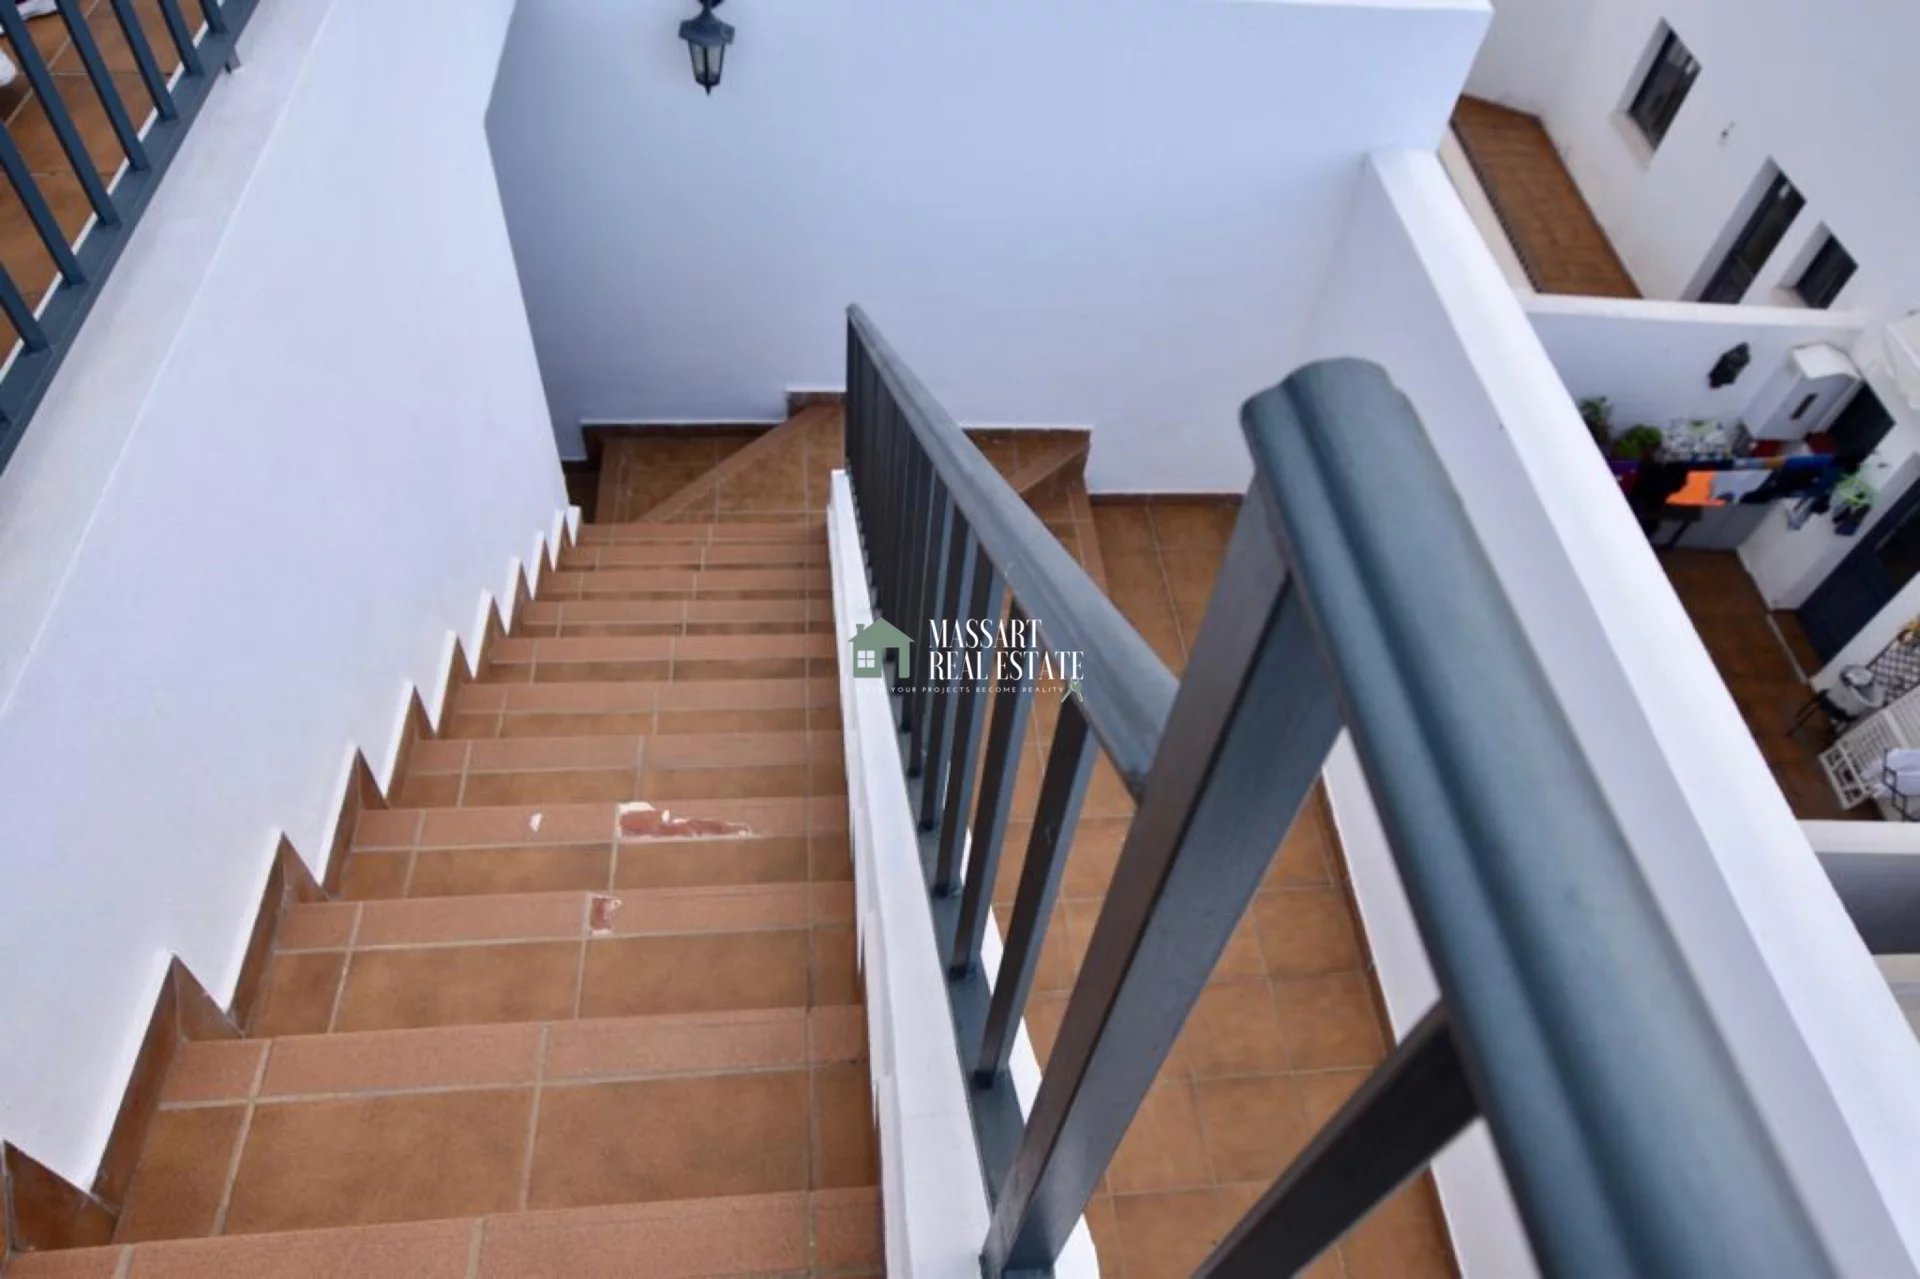 Bright 180 m2 semi-detached house on three floors located in the north of the island, in Icod de los Vinos.